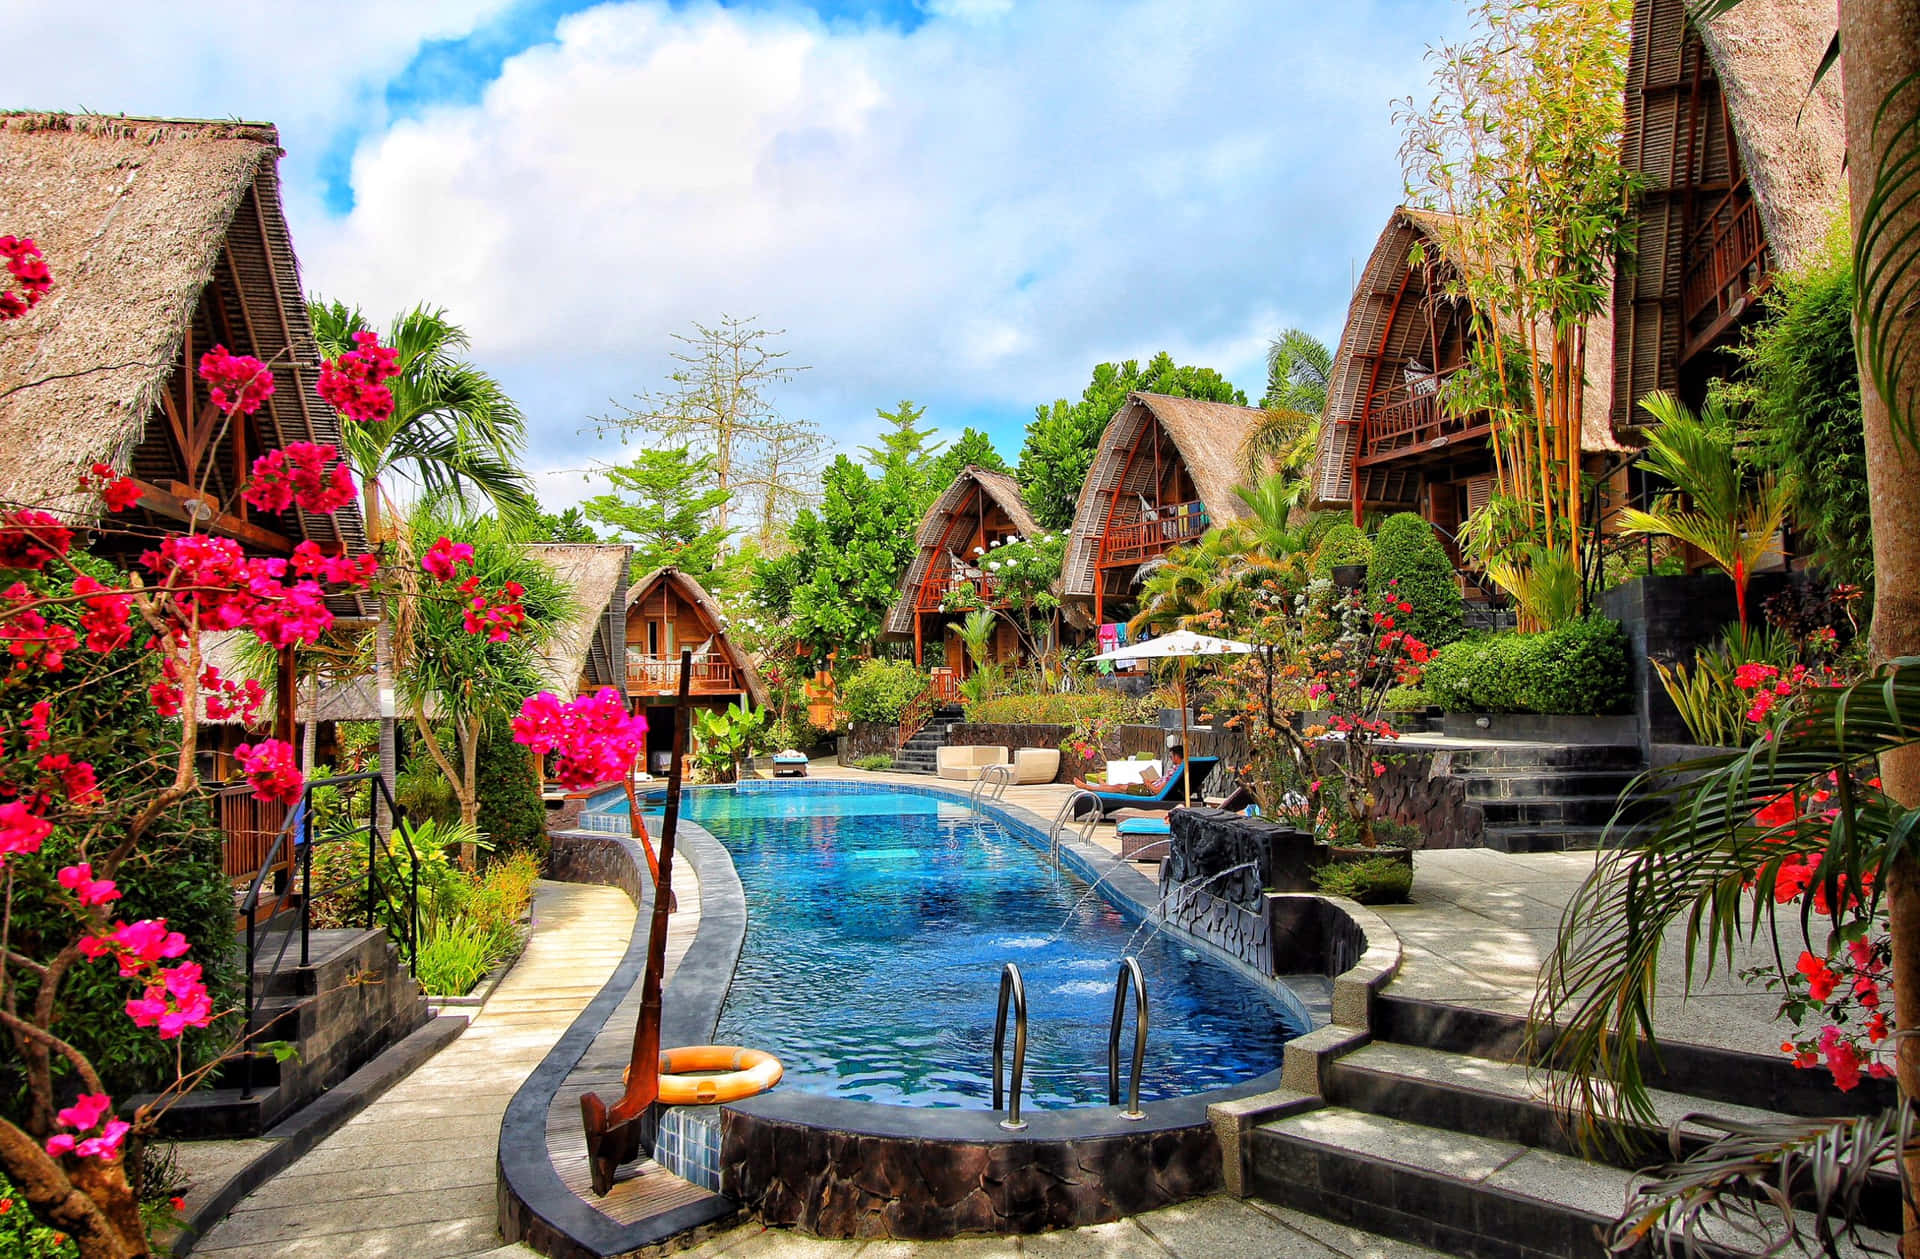 "Escape to Balinese Paradise"